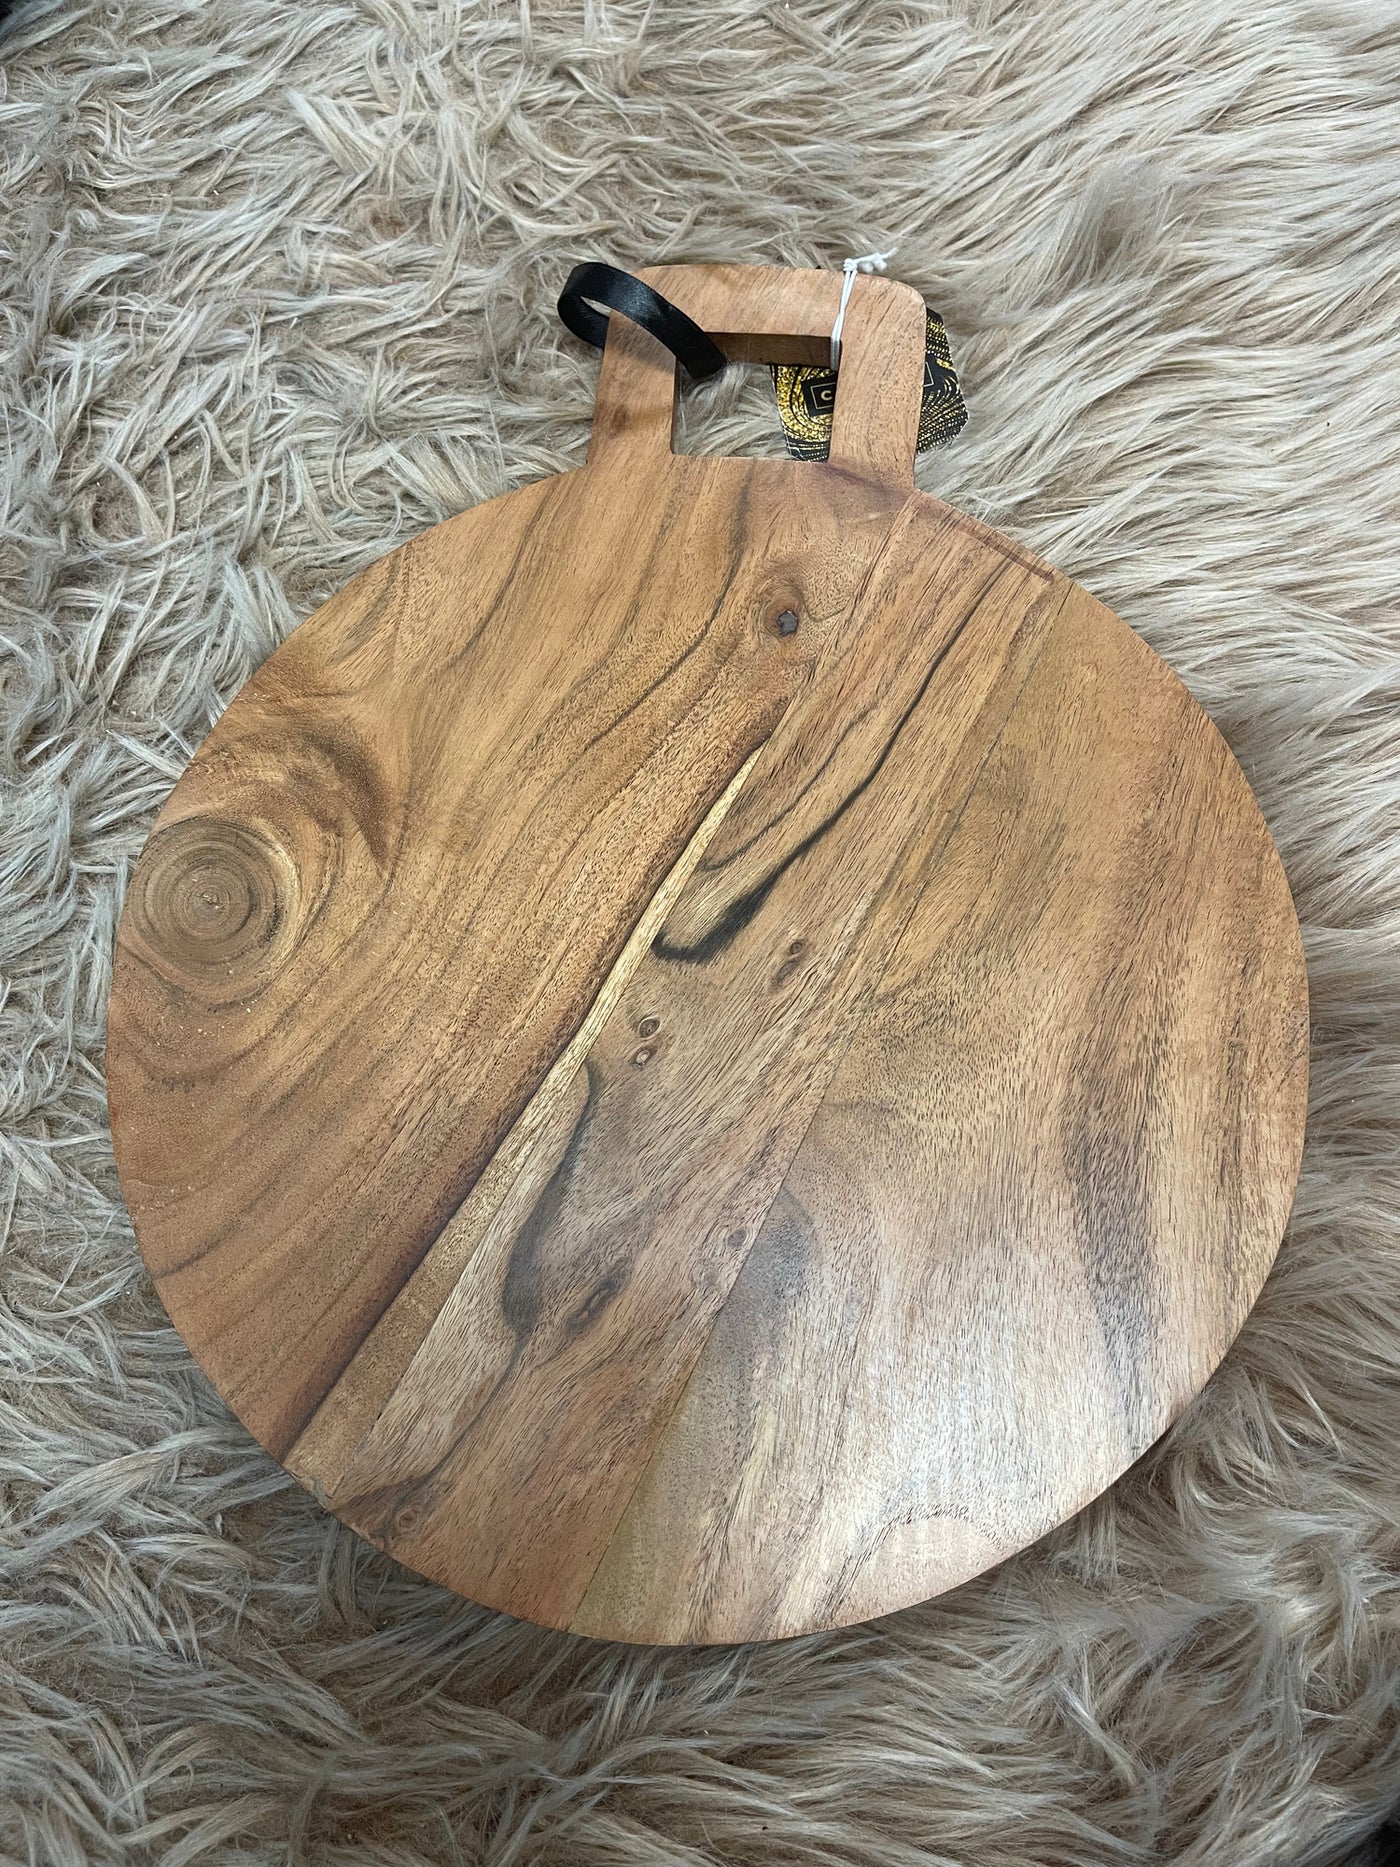 Cutting Board- Round Natural Wood w/ Square Handle (Large)